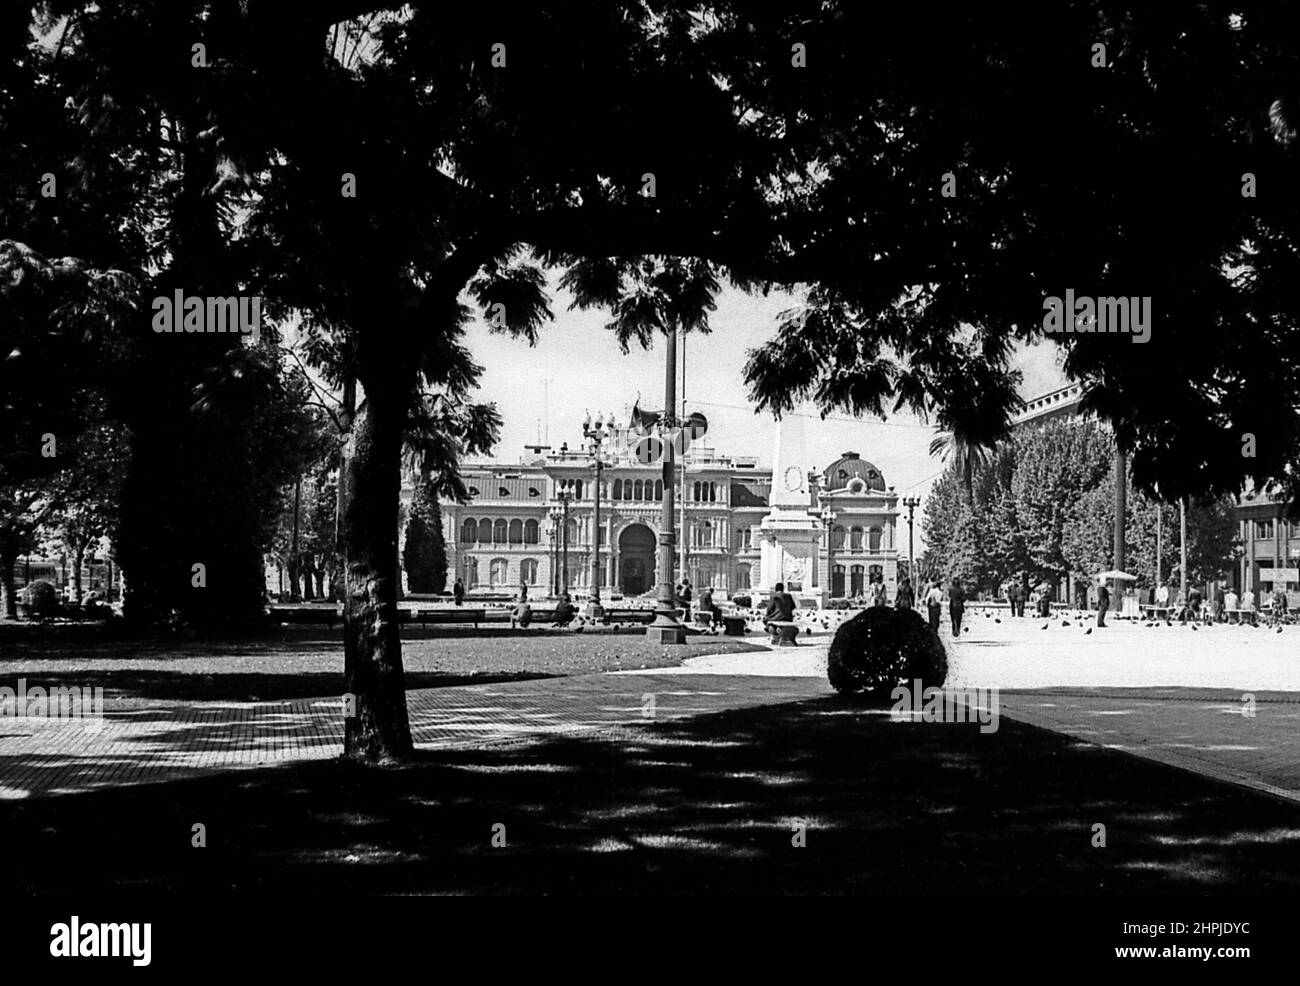 ARG 261B Buenos Aires Argentina 1973 The Casa Rosada plaza in the town centre Stock Photo